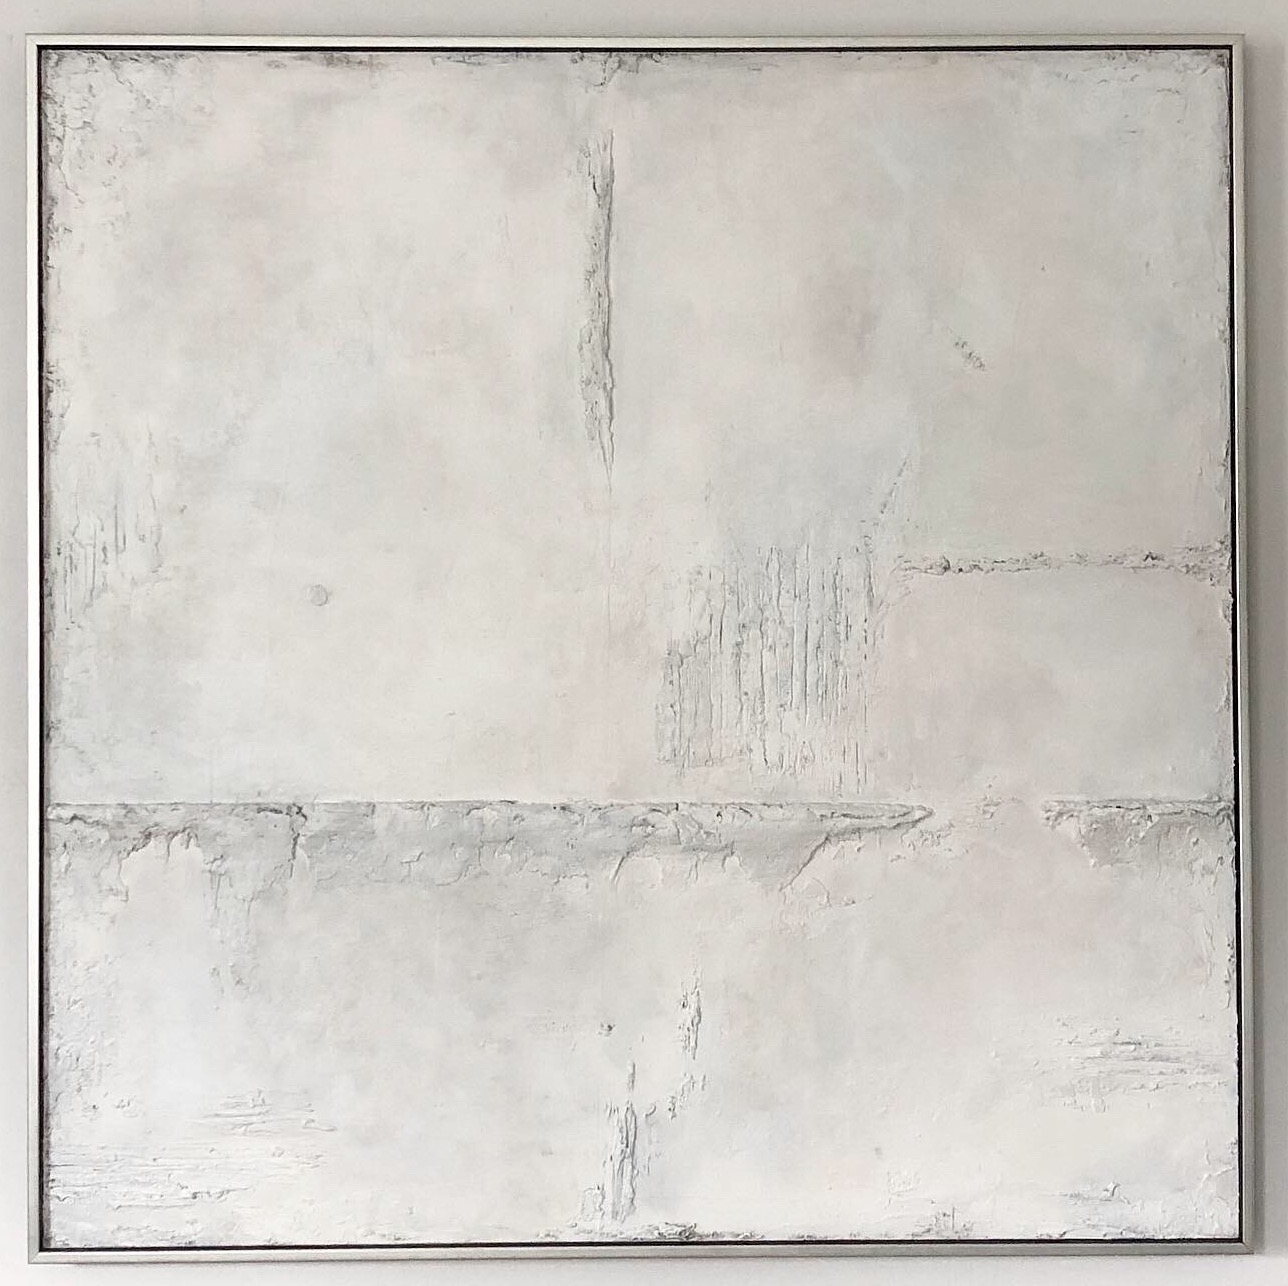  White Linear Series  2019  120 x 120cm  Mixed Media on Board 